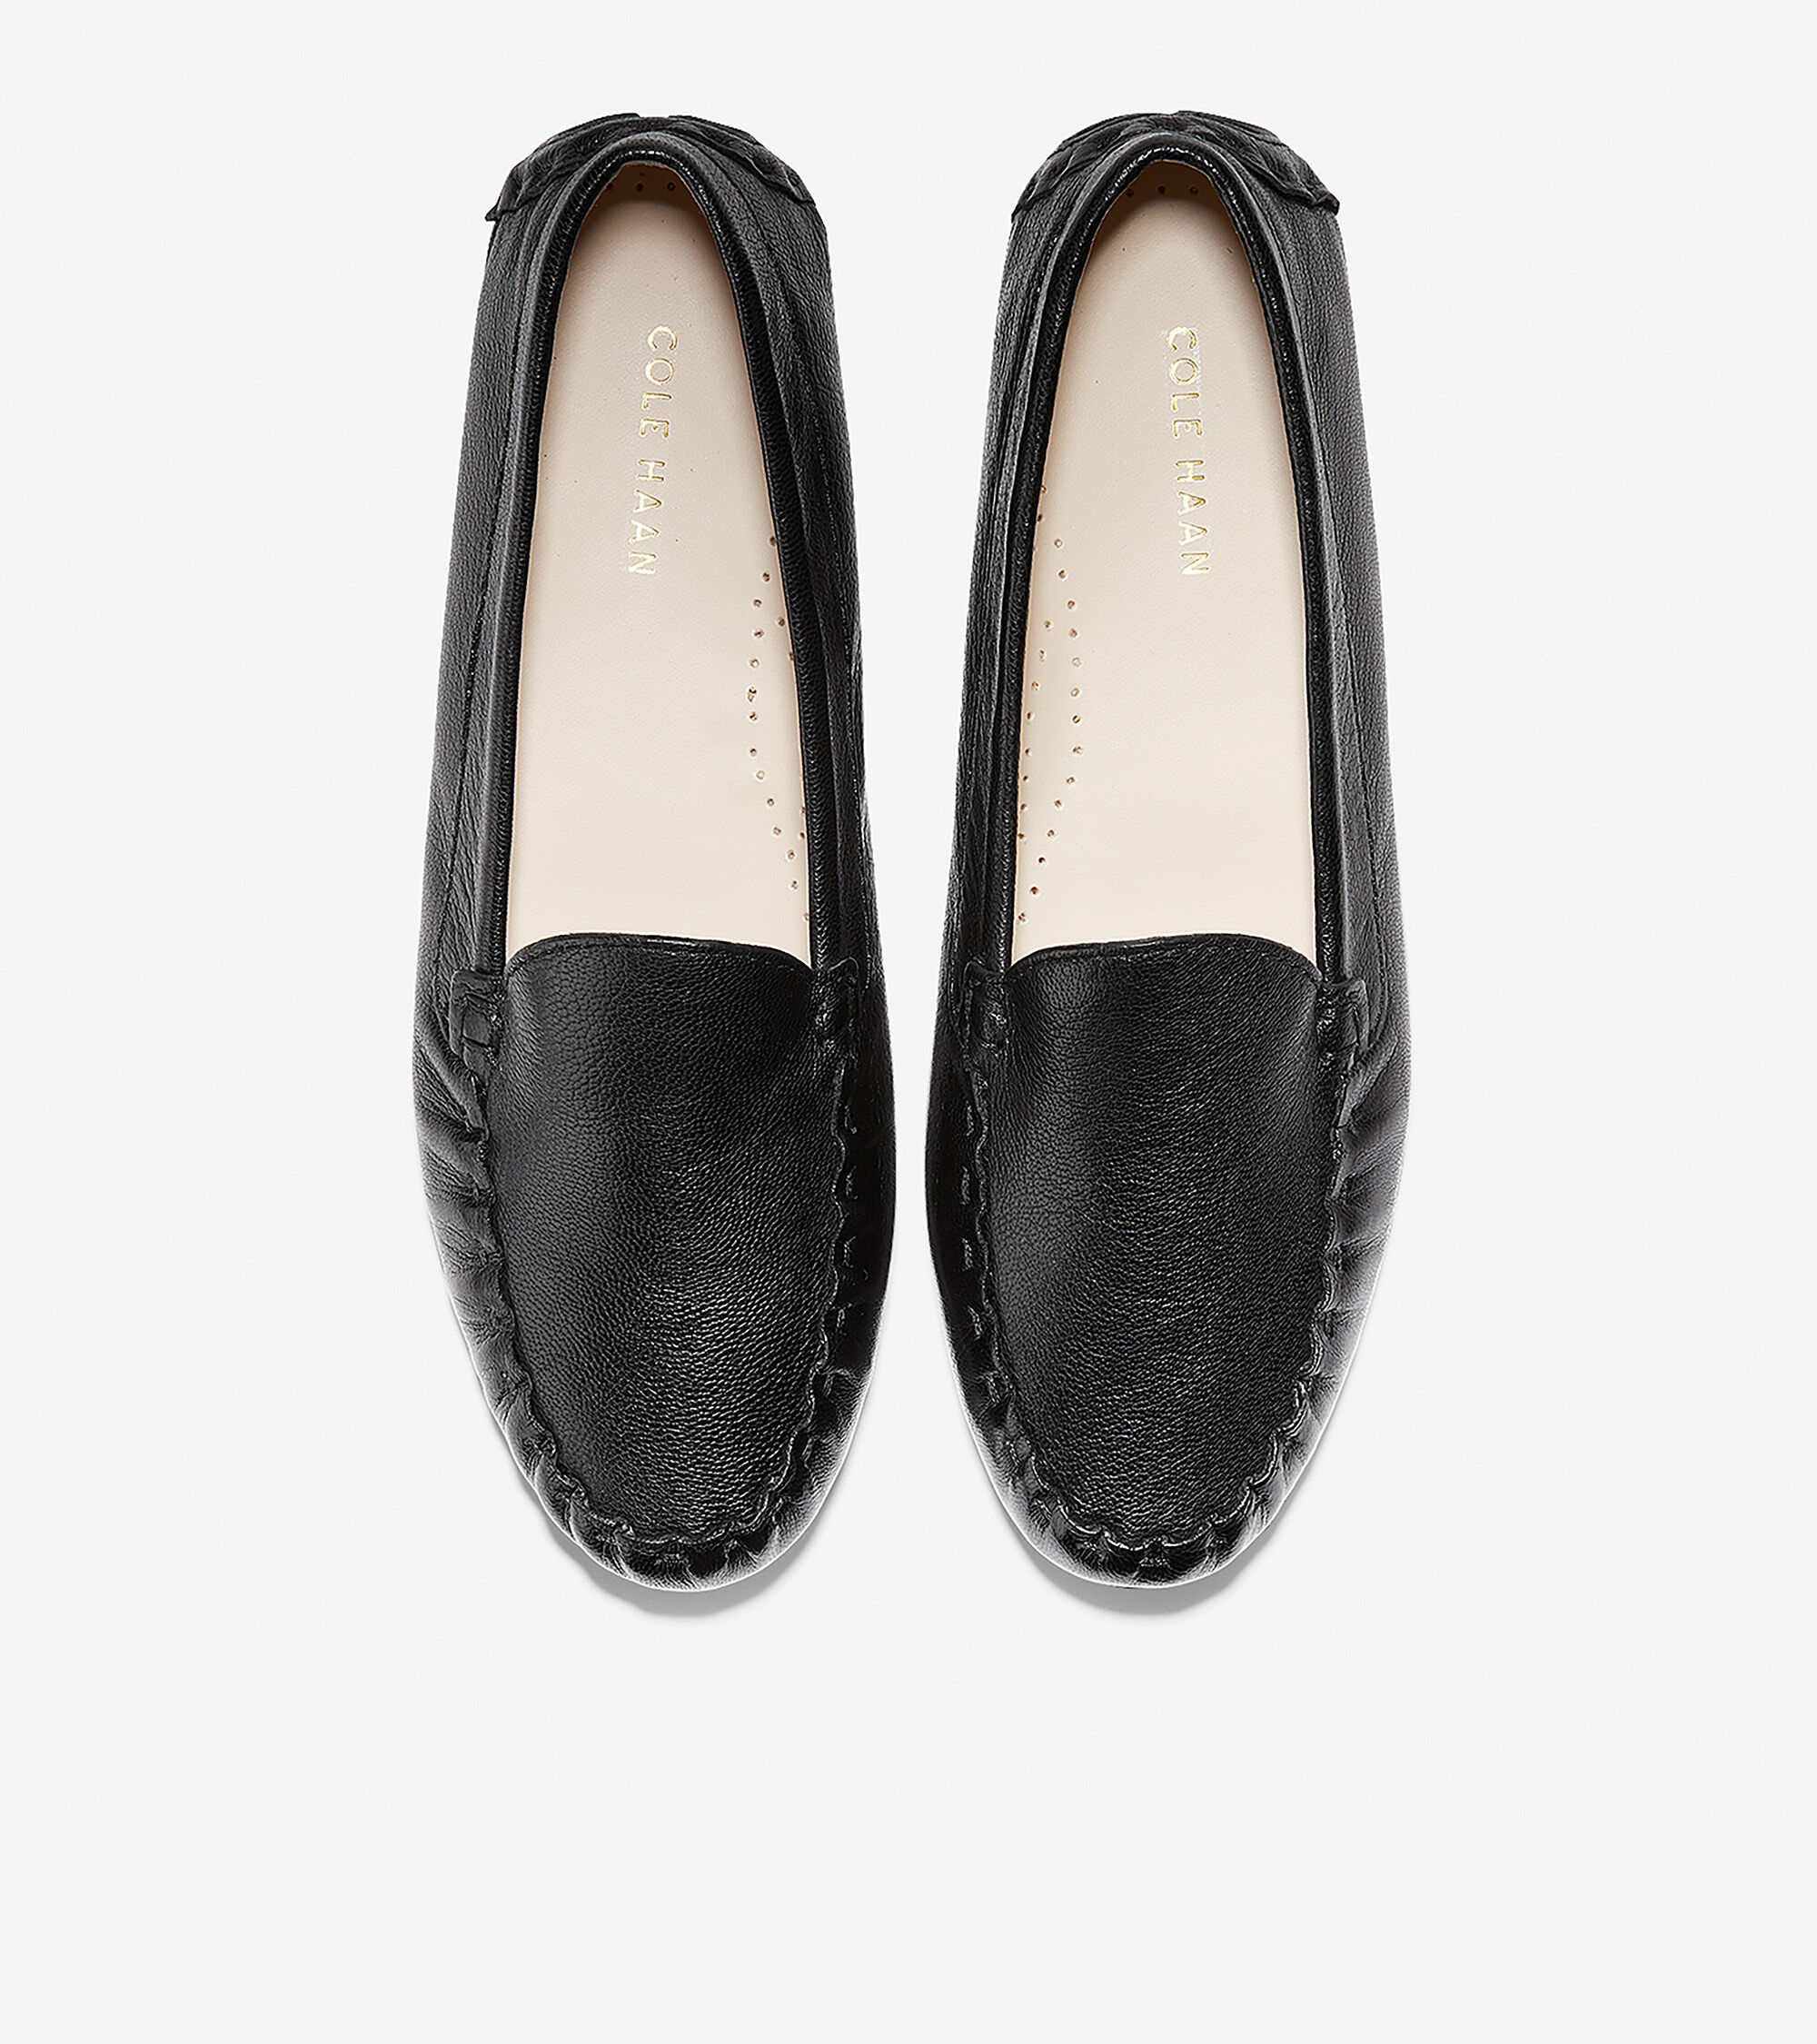 evelyn driver cole haan